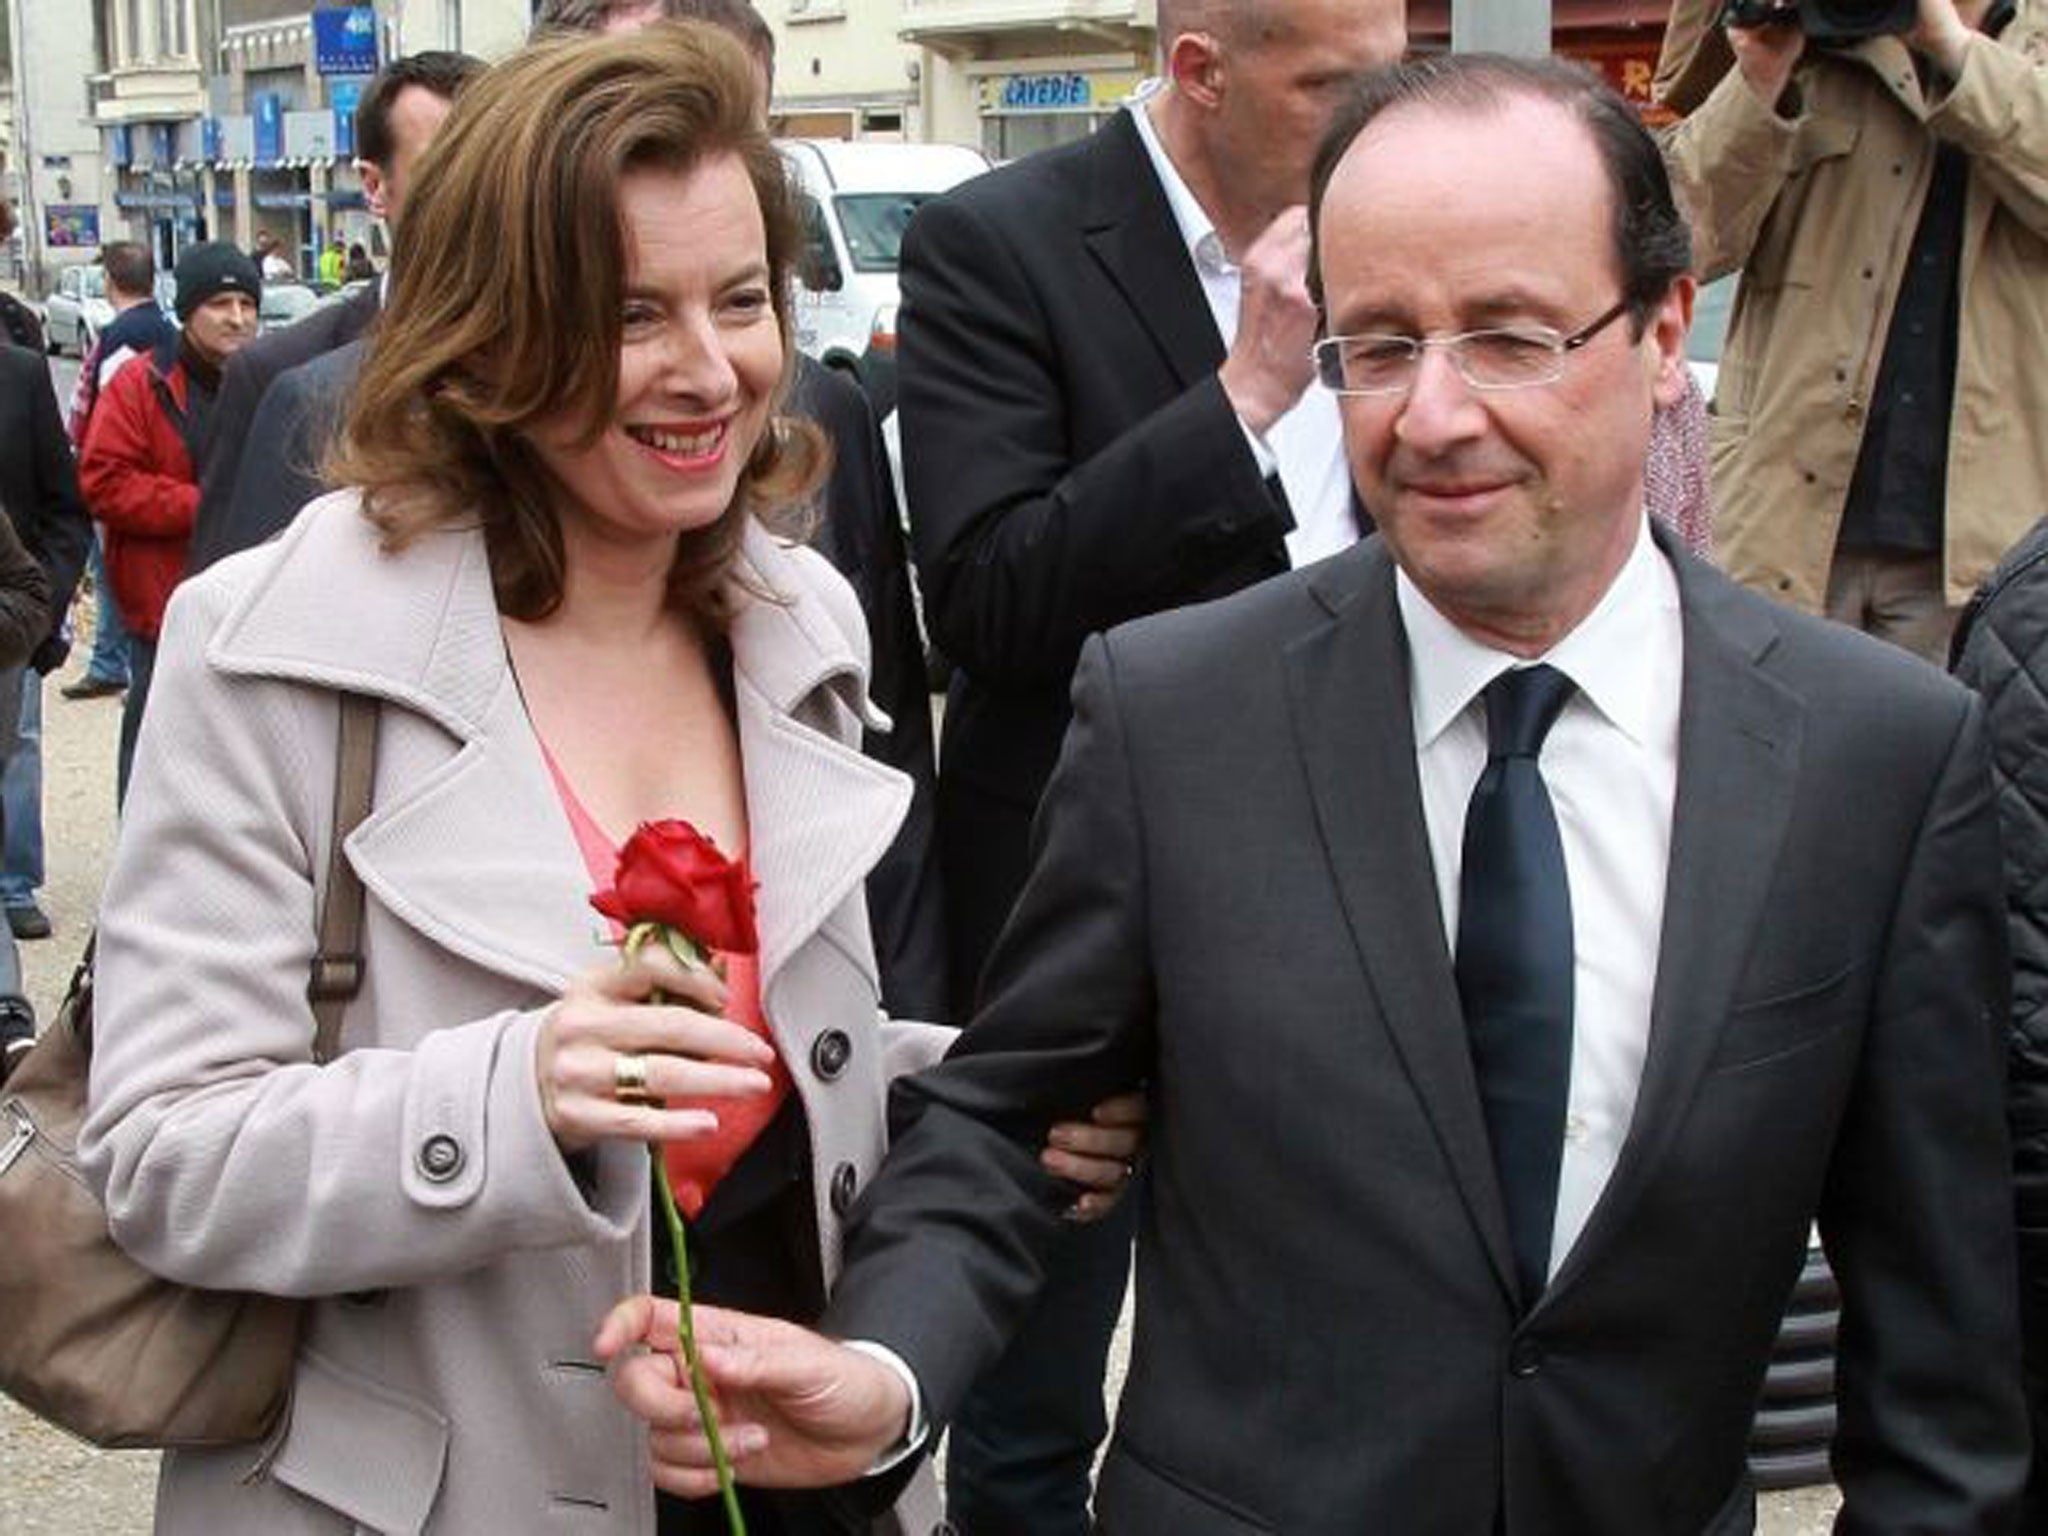 Hollande offers a rose to his then-companion Valerie Trierweiler, in Tulle, southwestern France back in 2012